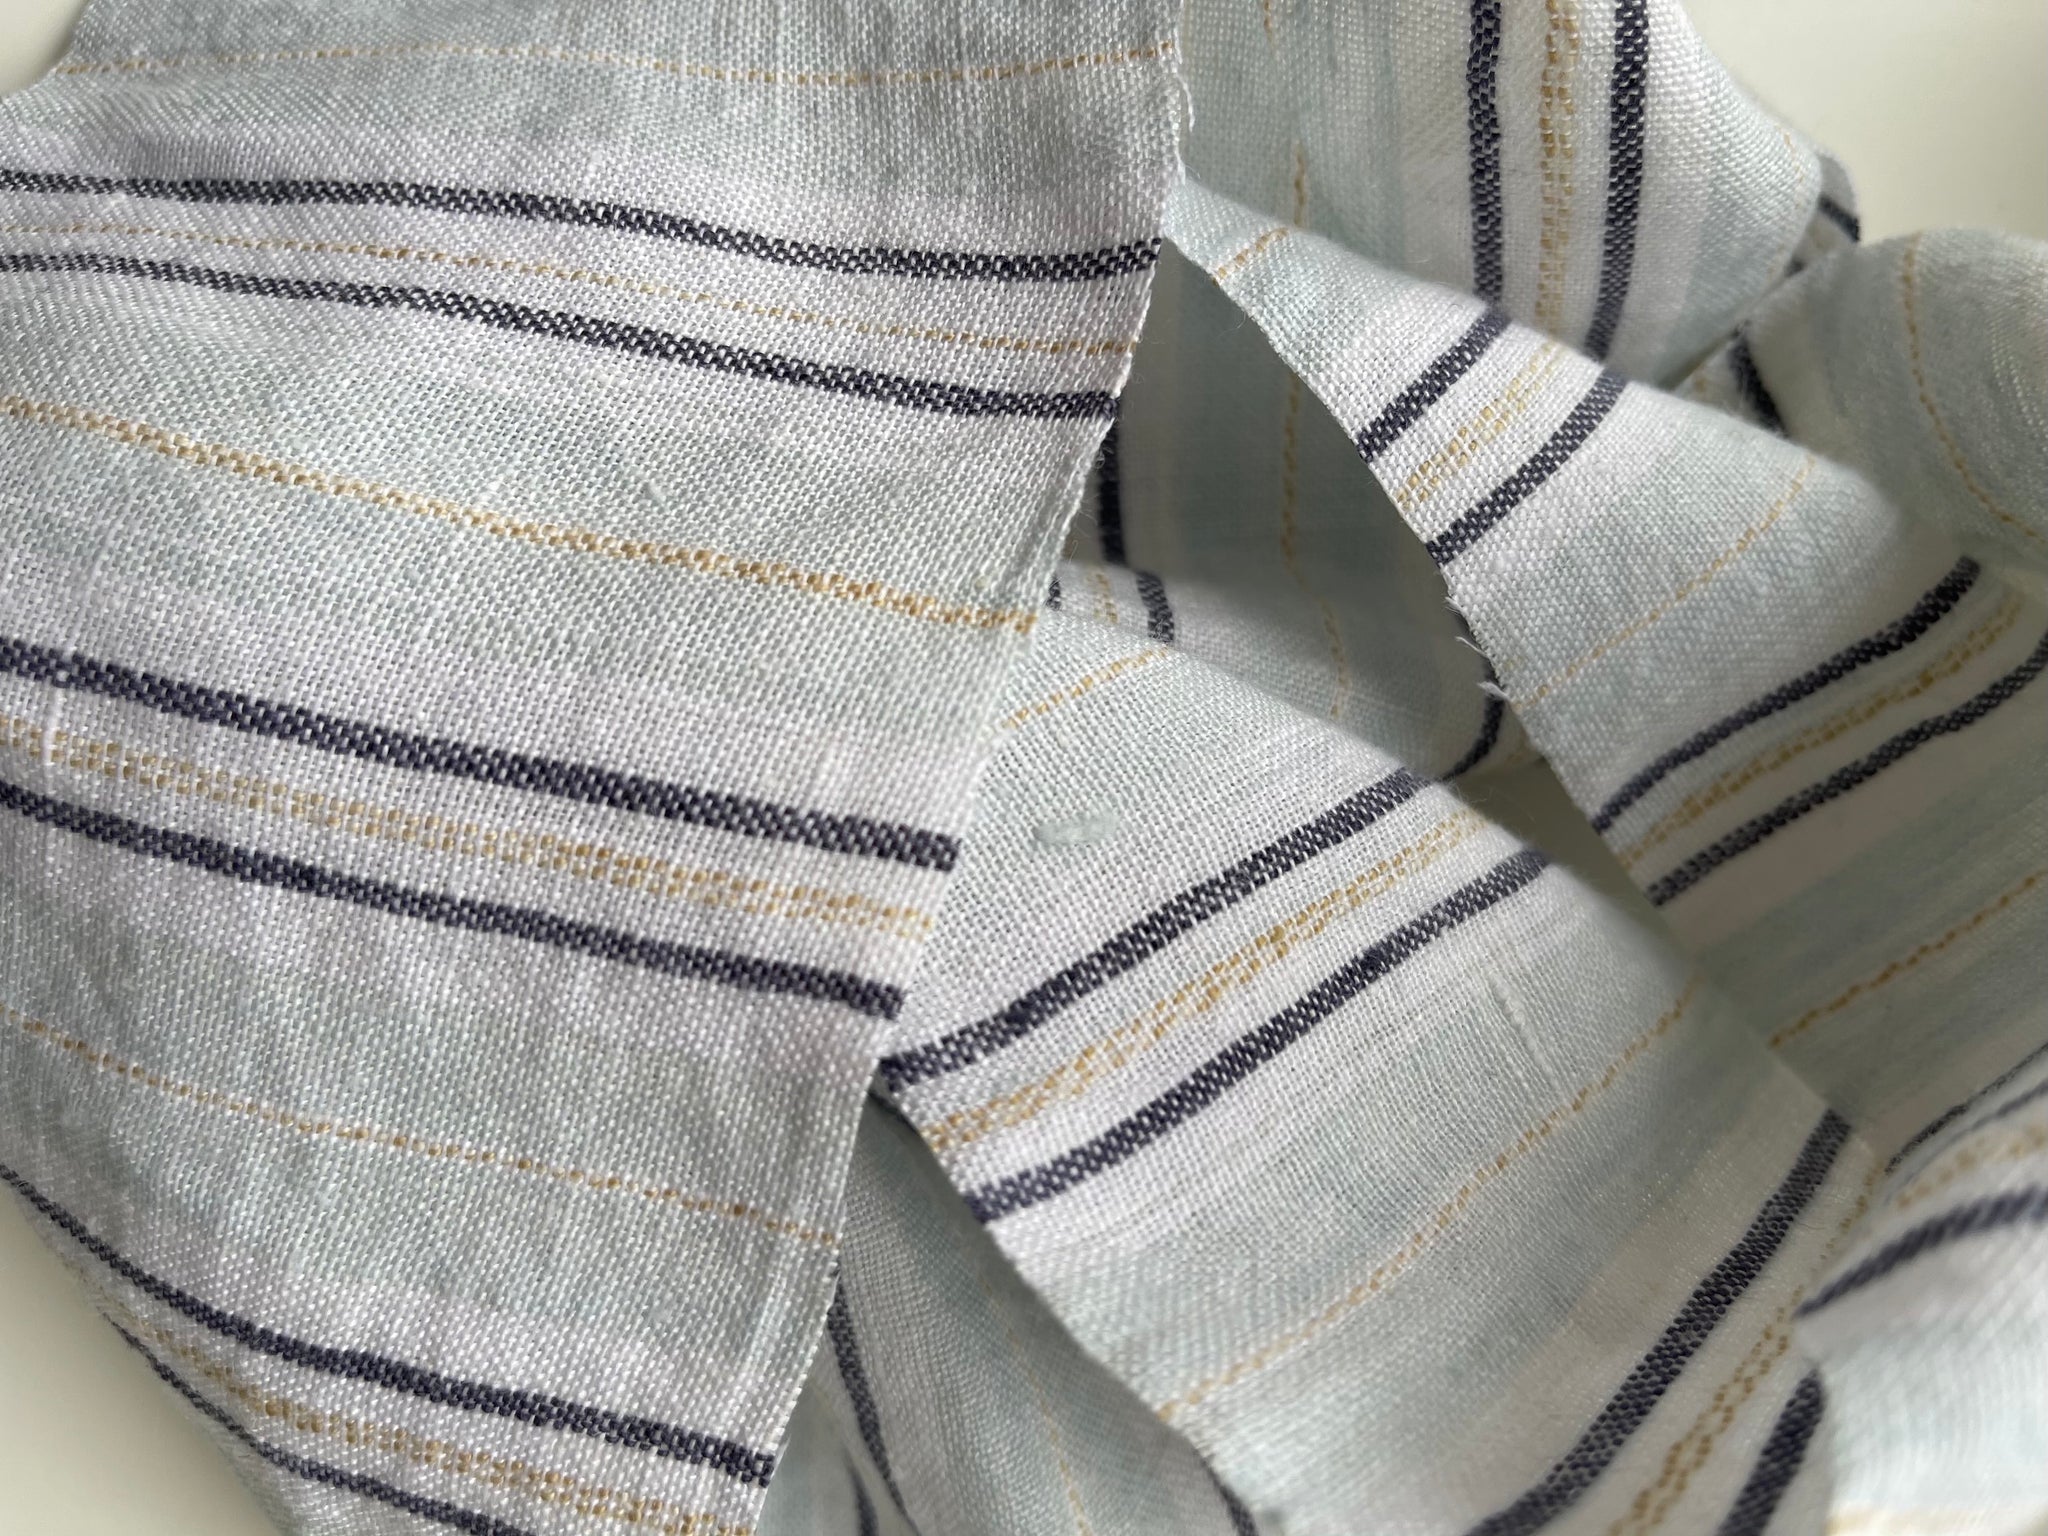 Sky Blue Stripes Linen Fabric - Stone Washed Super Soft